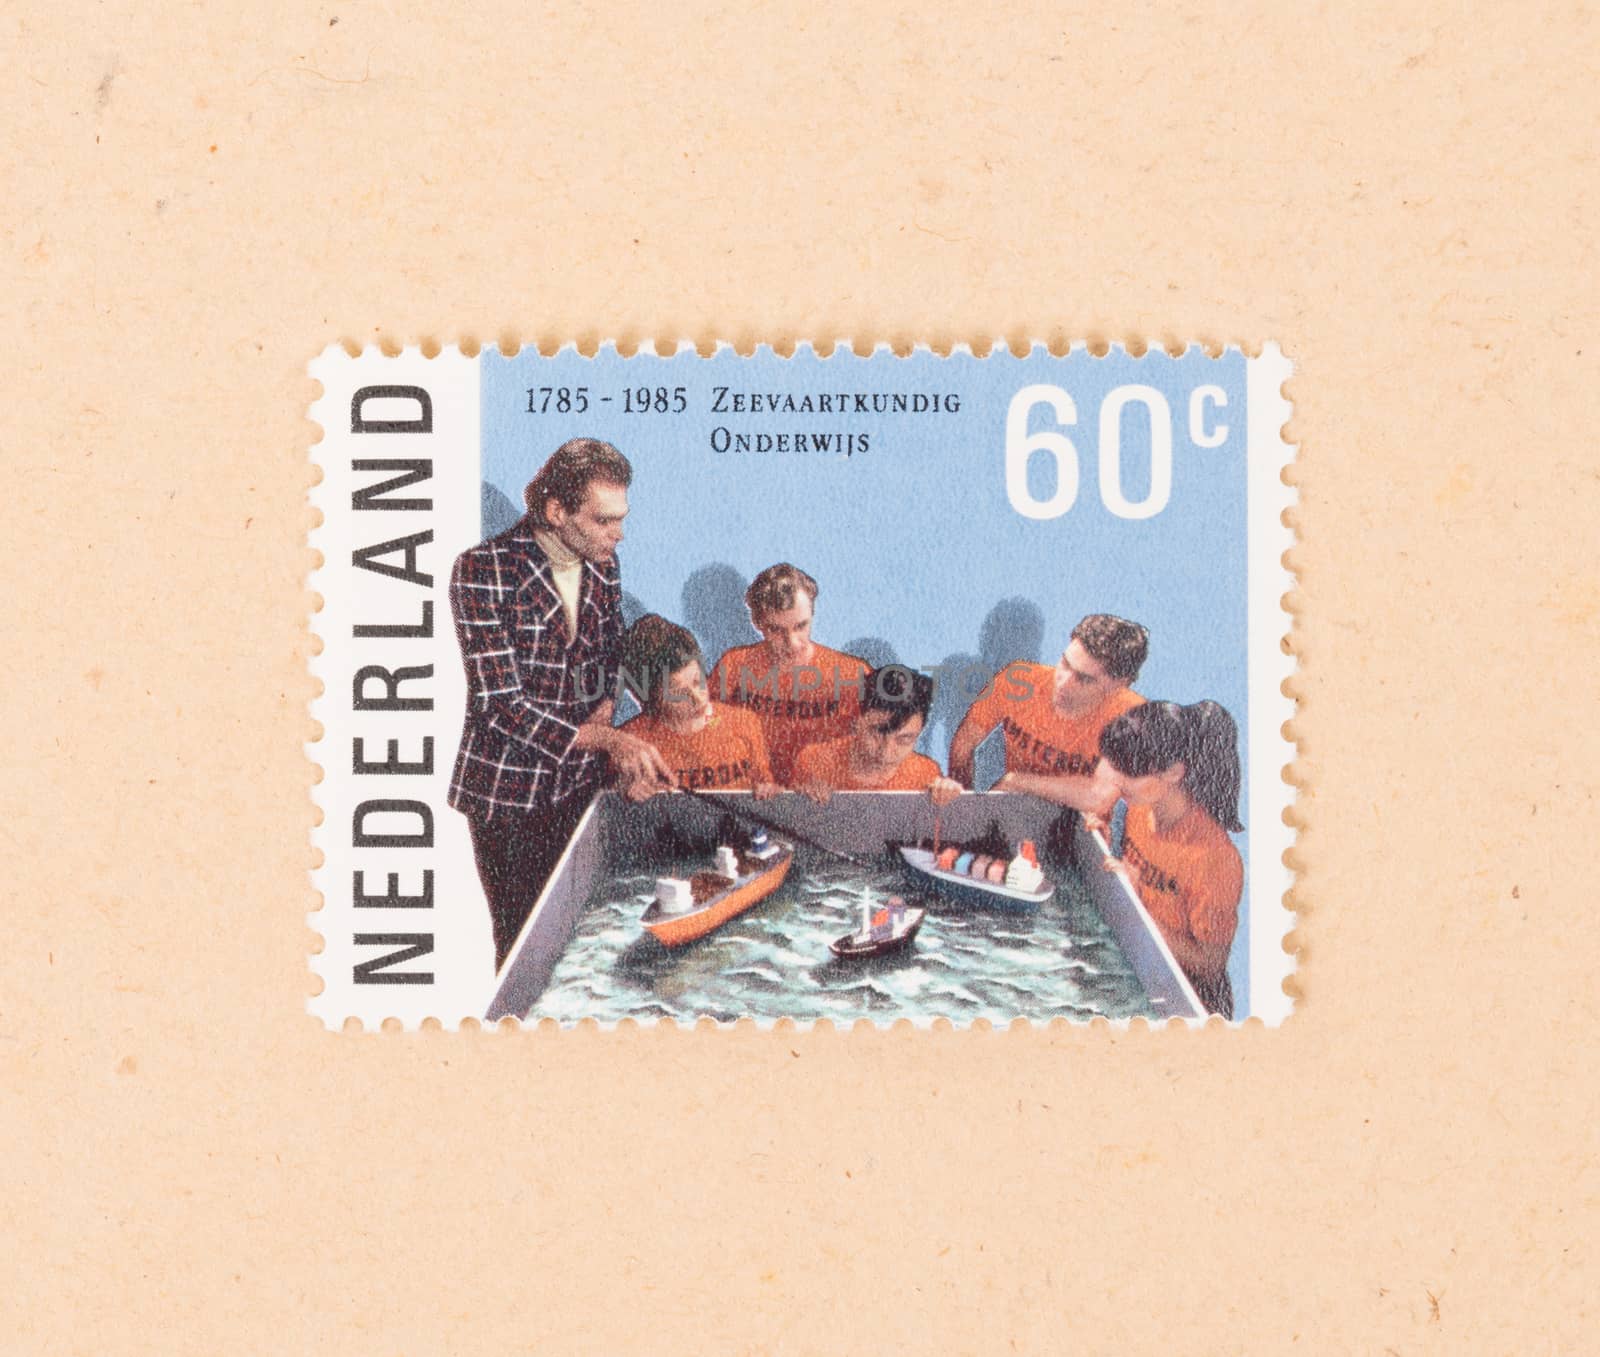 THE NETHERLANDS 1985: A stamp printed in the Netherlands shows the dutch Maritime school, circa 1985